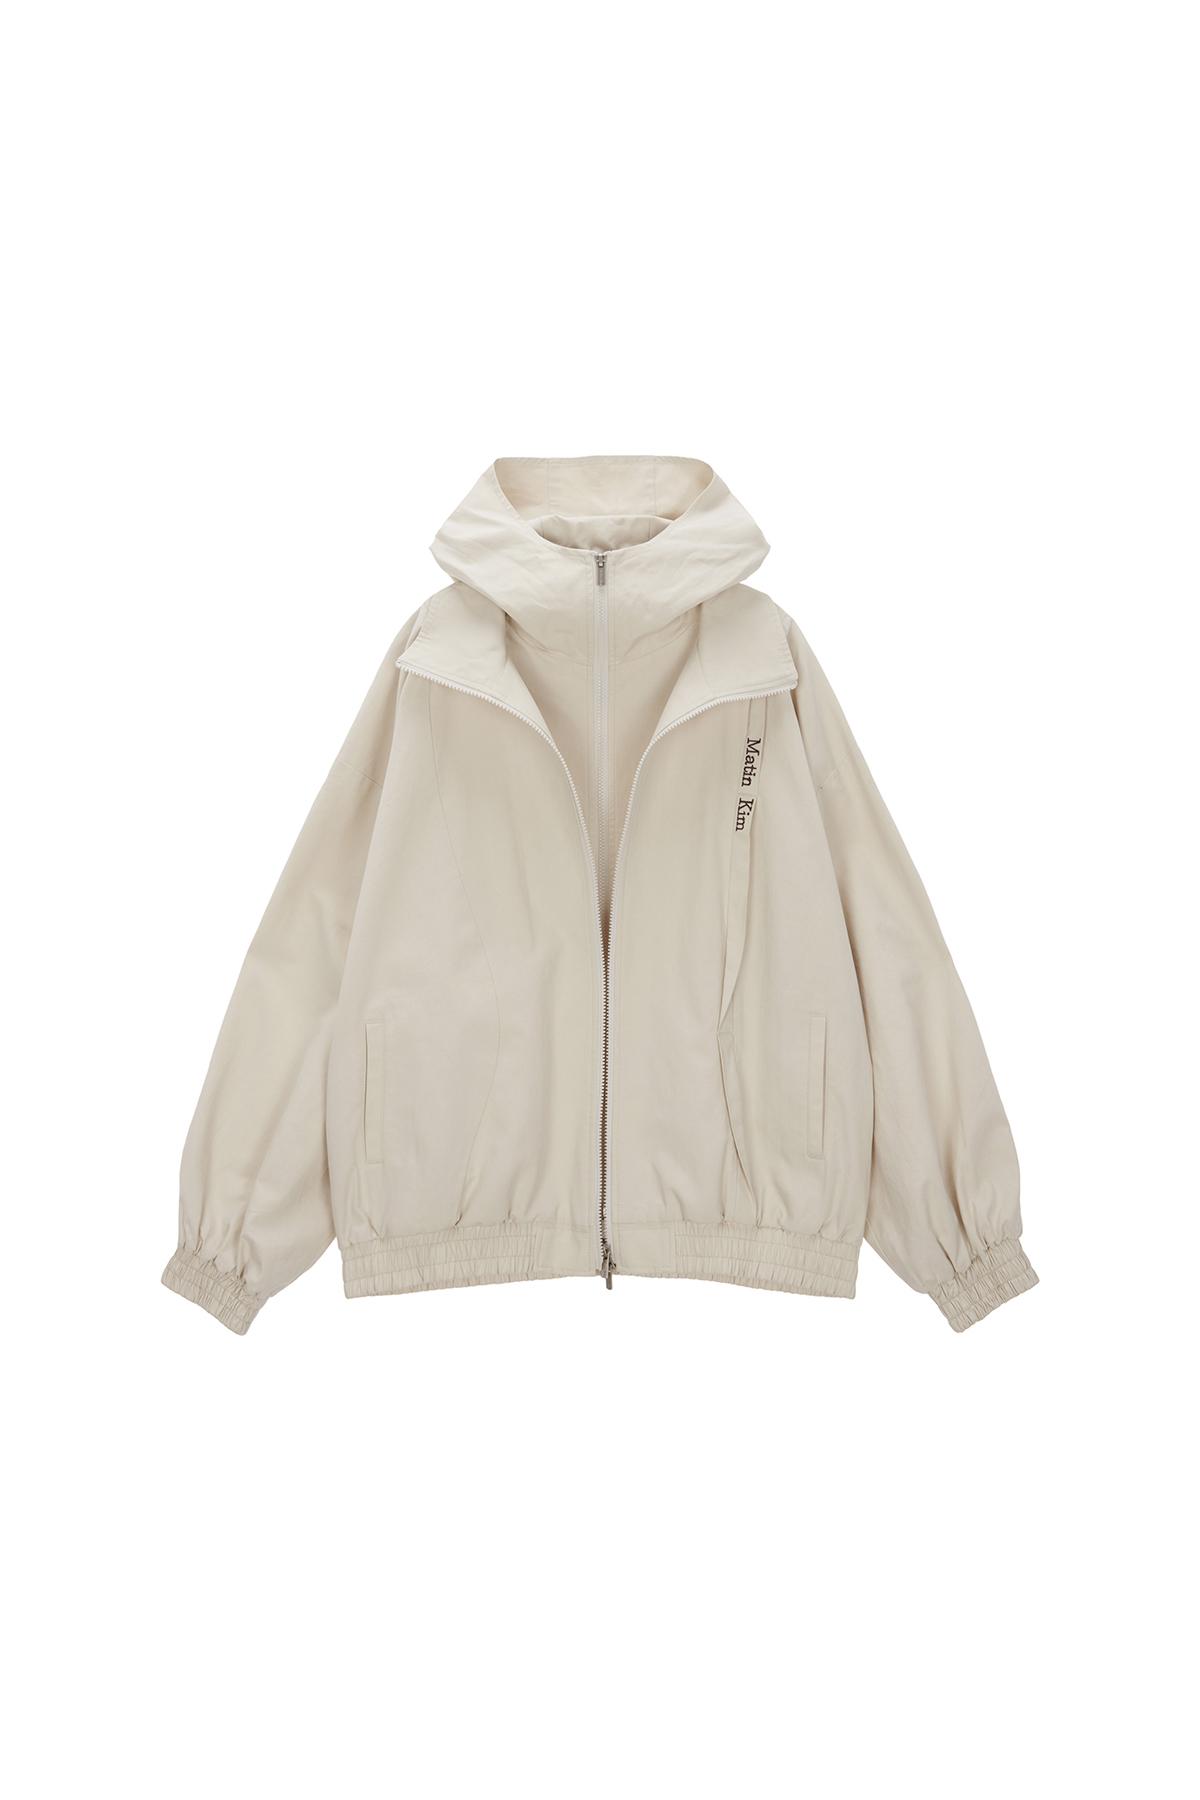 LAYERED HOODY BALLOON JUMPER IN IVORY